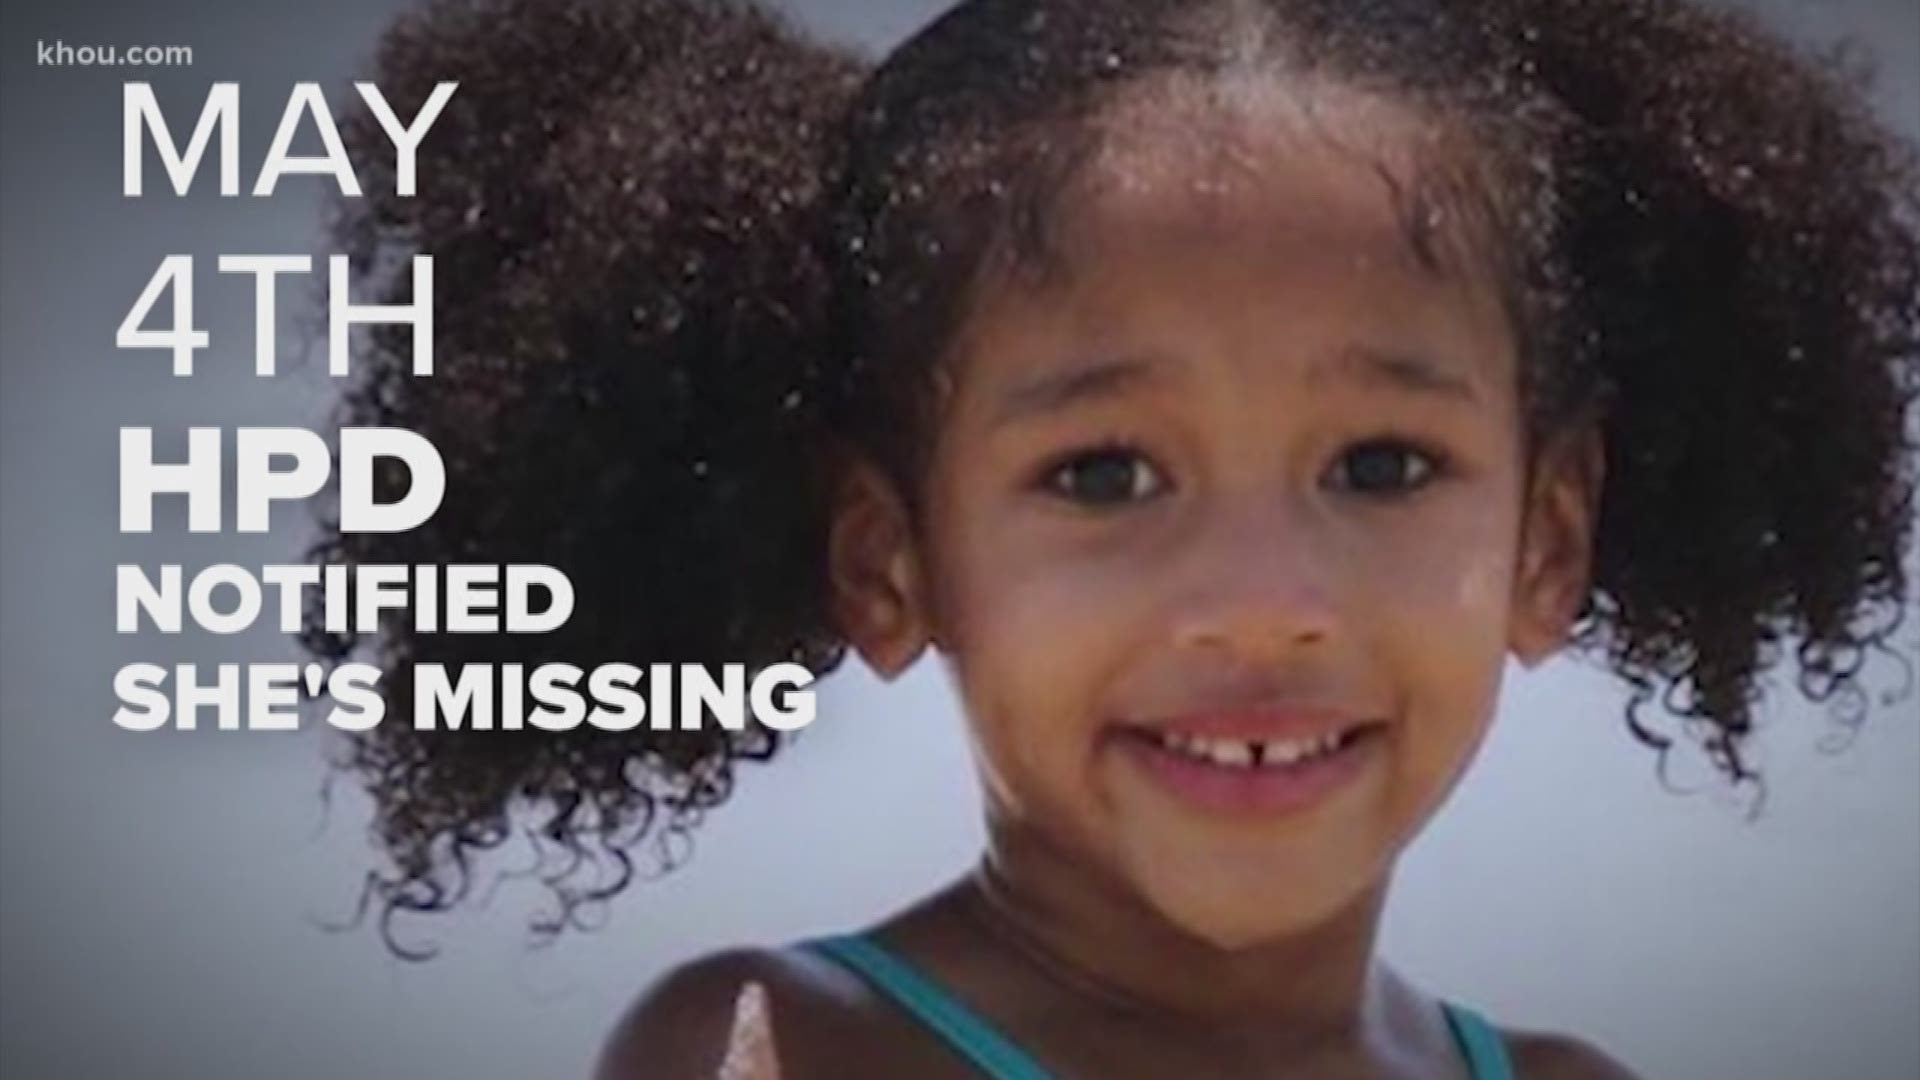 A lot has happened in the case of missing 4-year-old Maleah Davis. Here's a quick timeline of events starting from the last known photo of Maleah to the day her stepfather was arrested in connection to her disappearance.